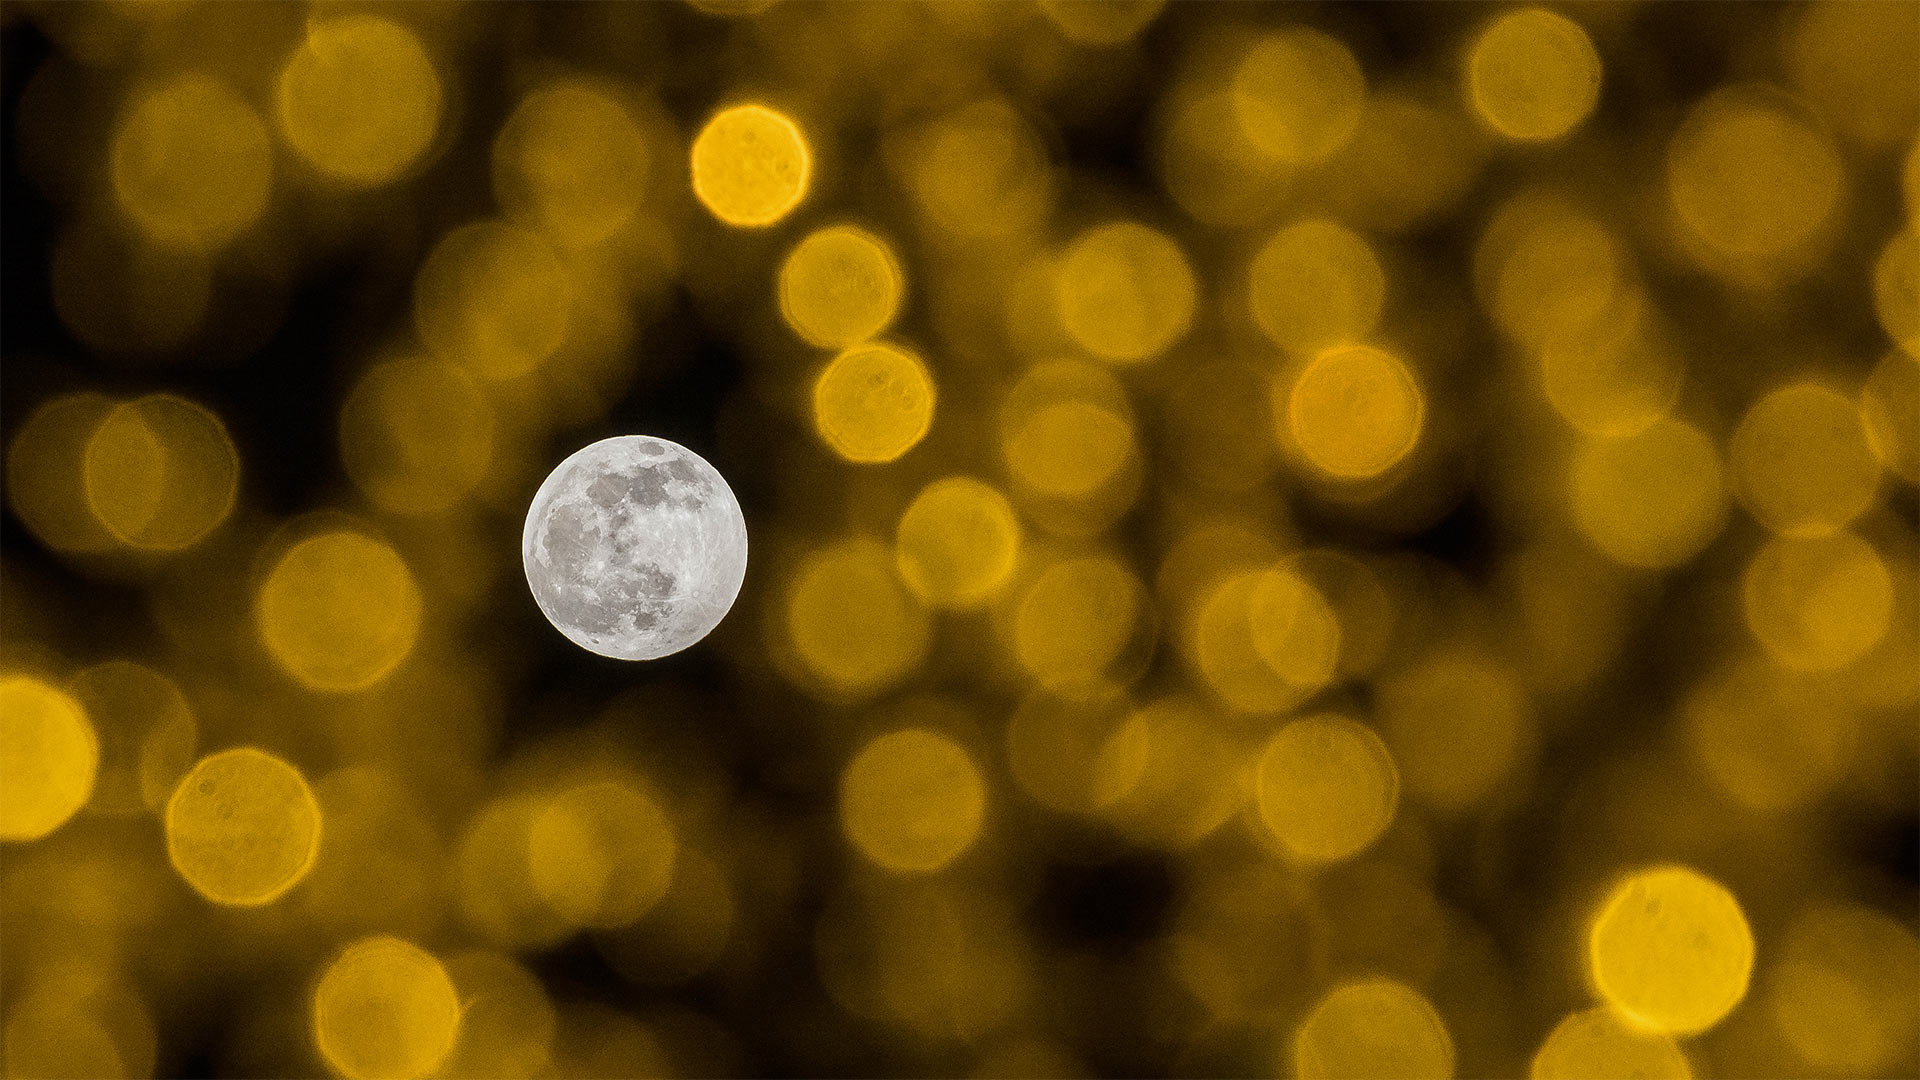 The December full moon seen through holiday lights - Jesus Merida/Getty Images)